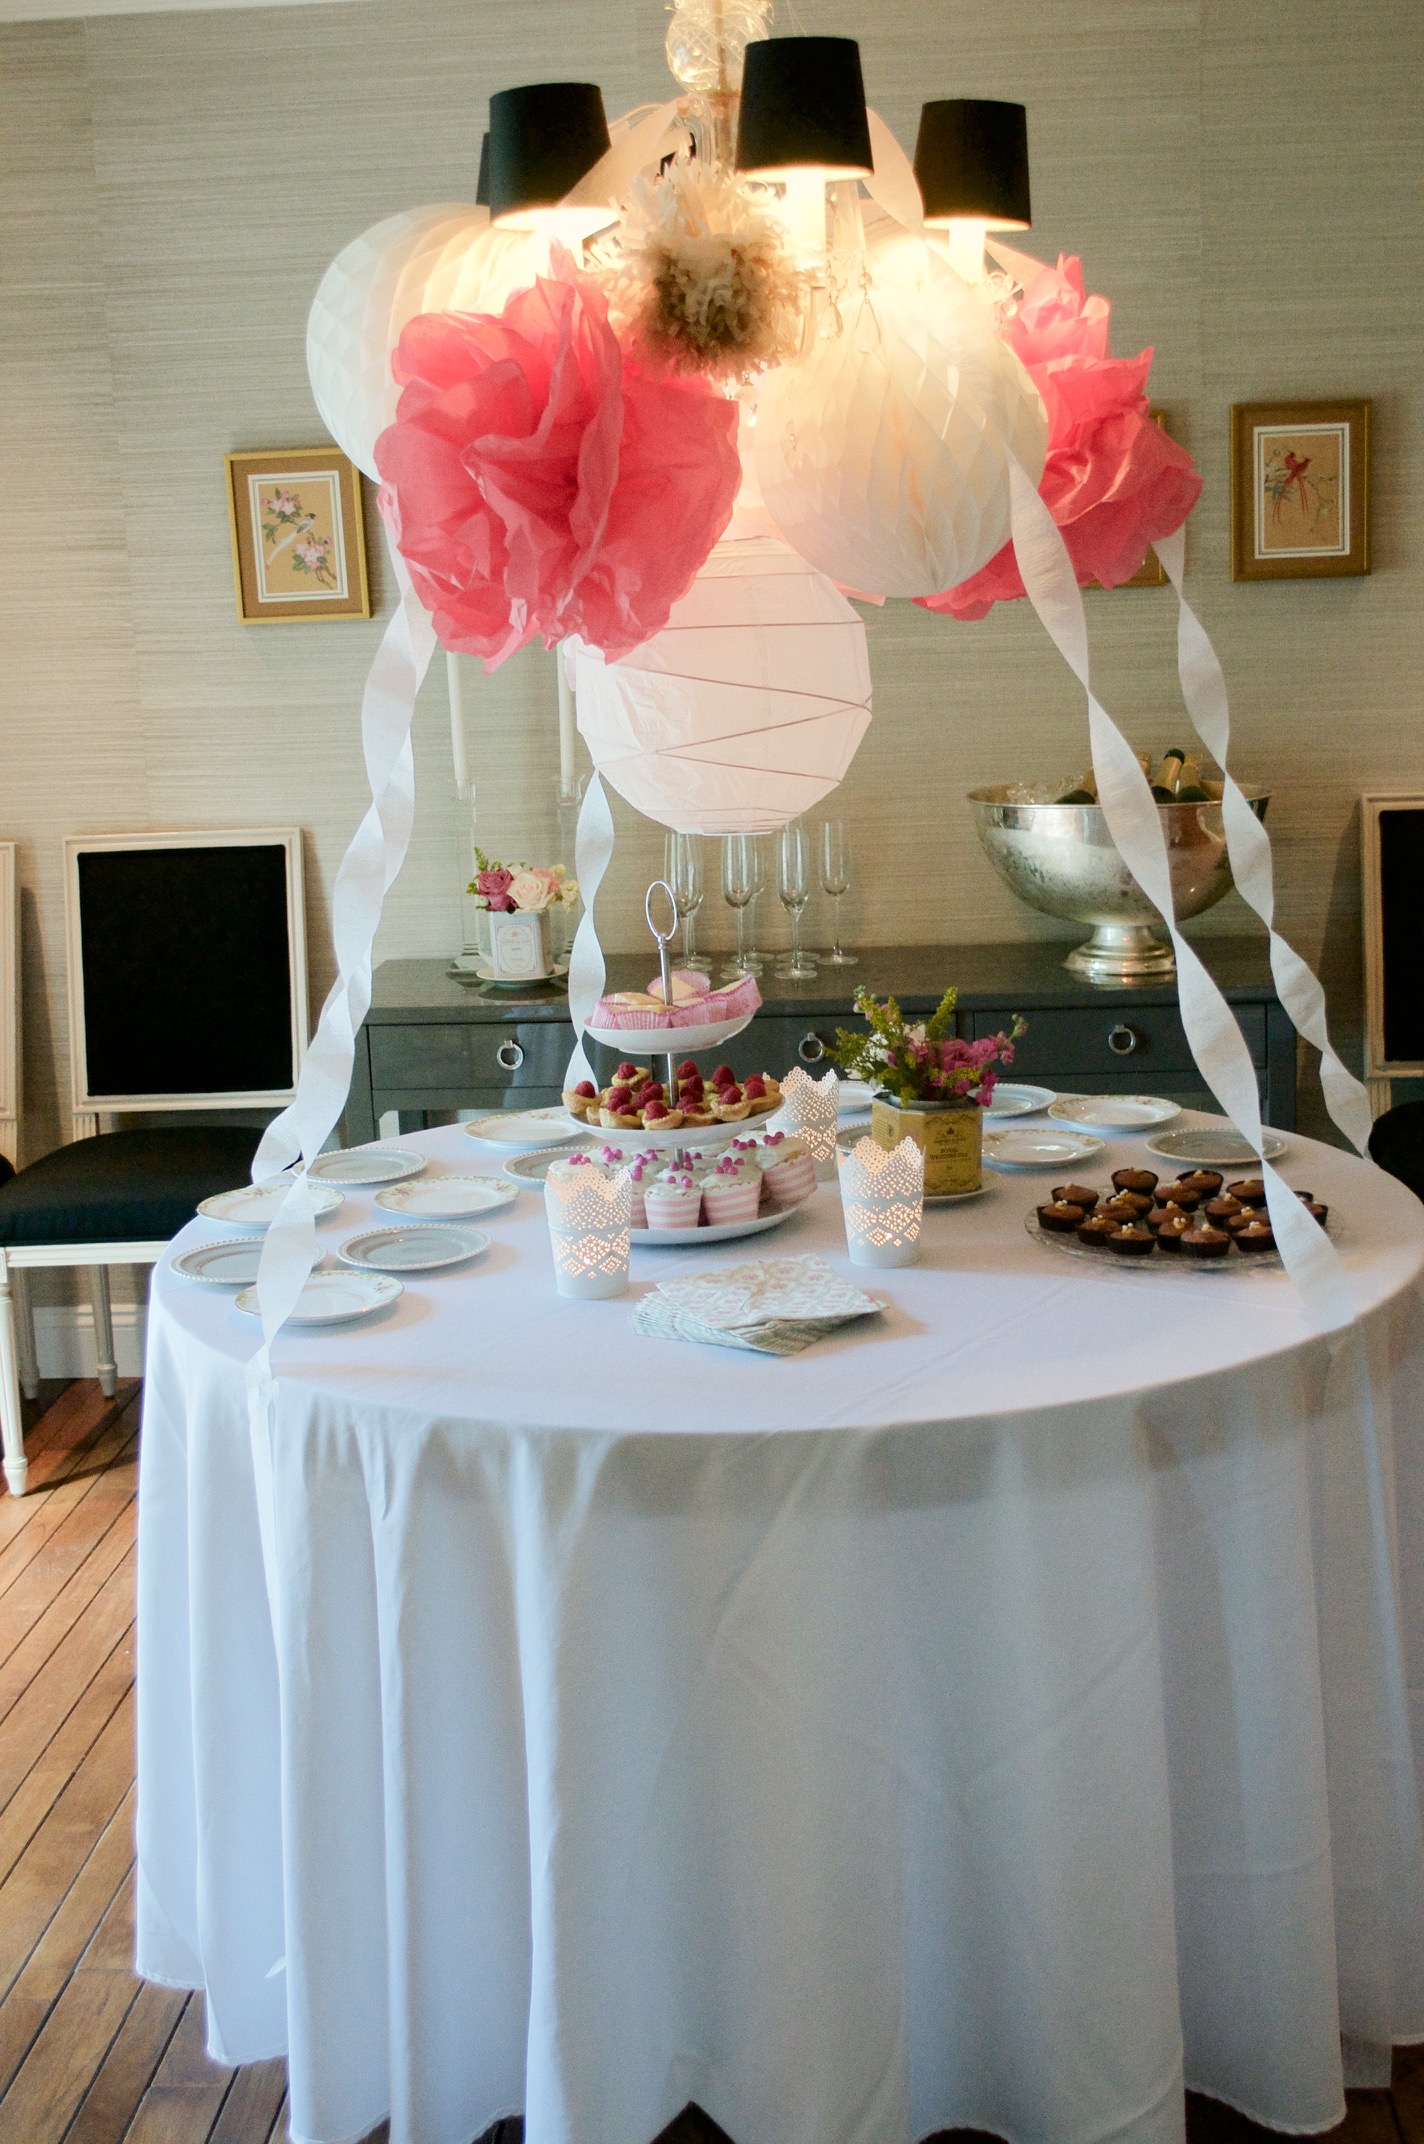 A pom pom and paper lantern display over the dessert table